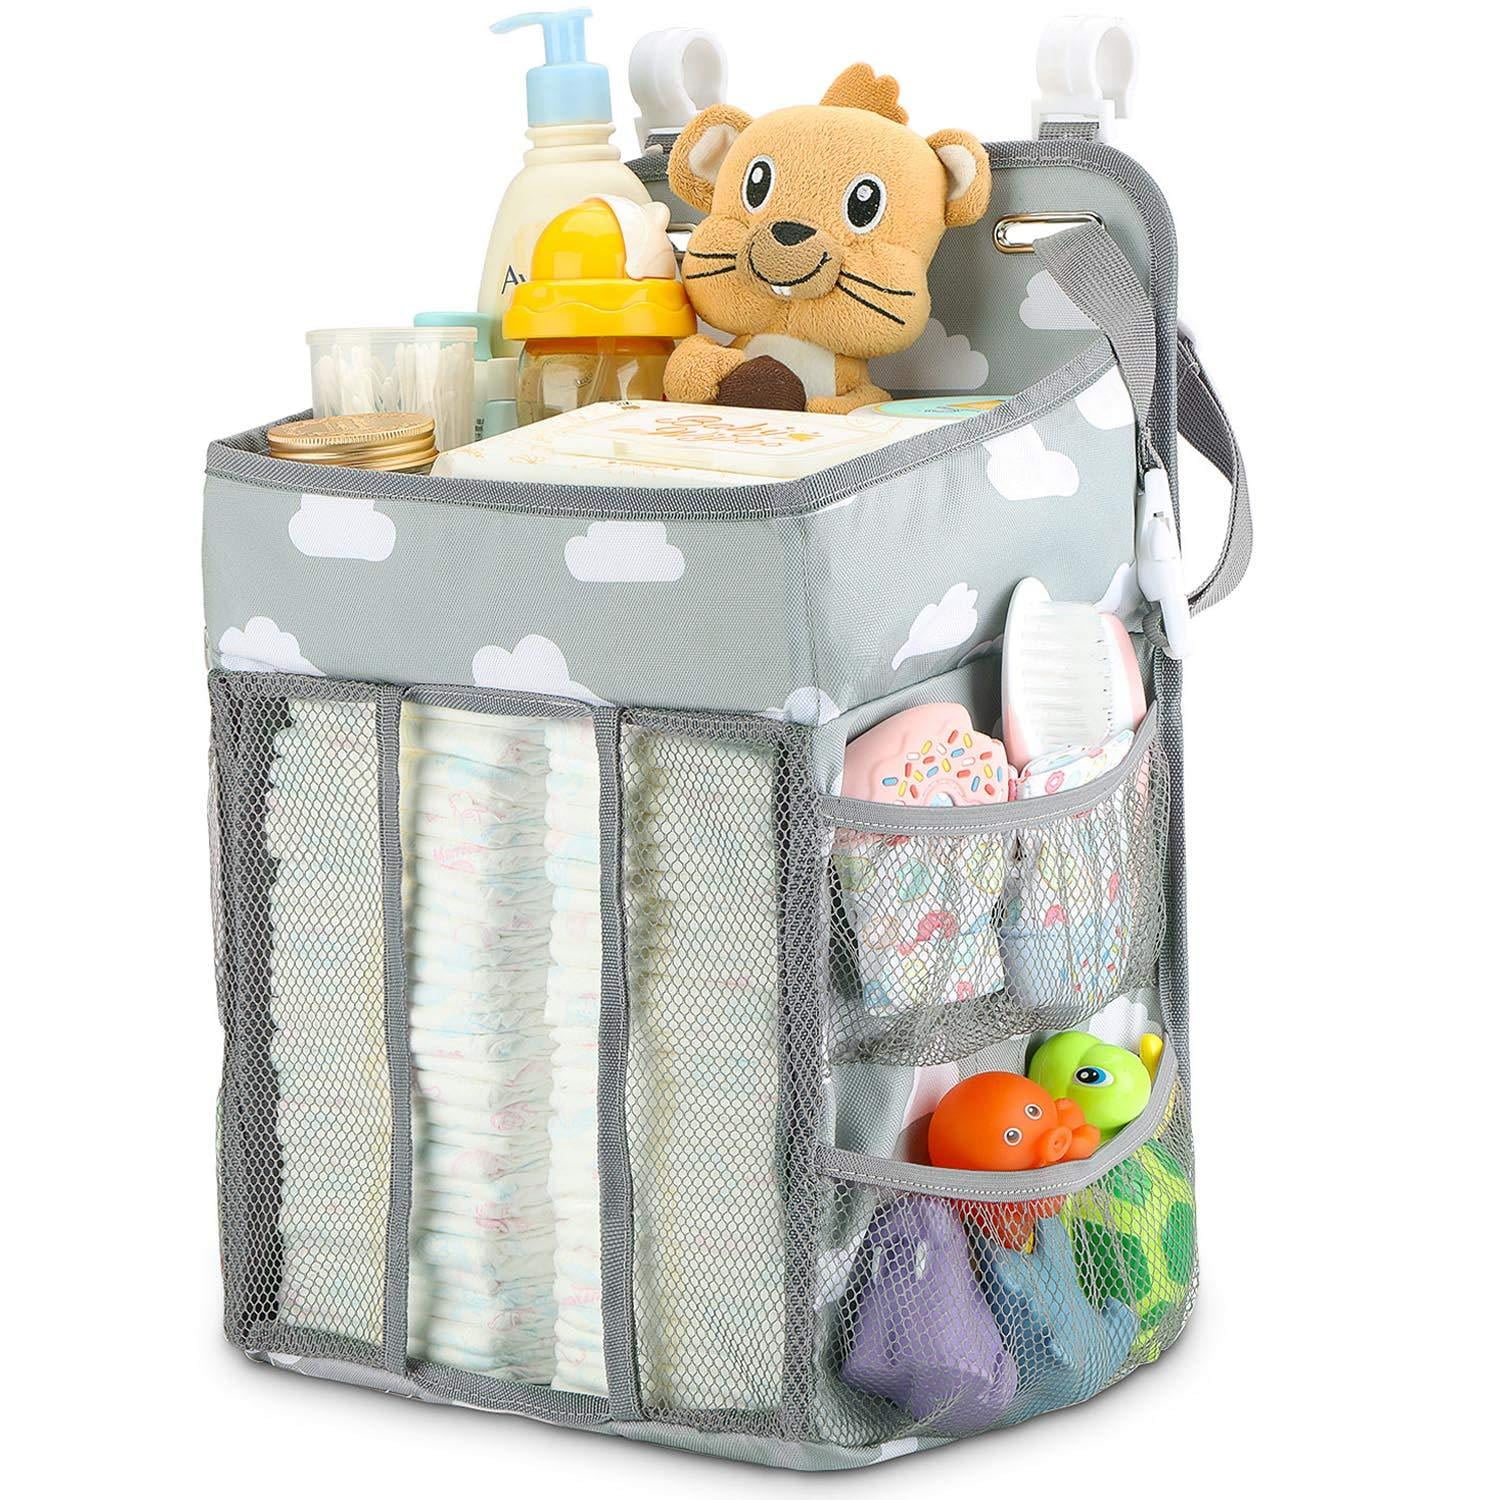 Selbor Baby Nursery Organizer and Diaper Caddy Baby Shower Gifts for Newborn Boys Girls Star Elephant, Bottle Cooler Included Crib Playard Wall Hanging Diaper Stacker Storage for Changing Table 